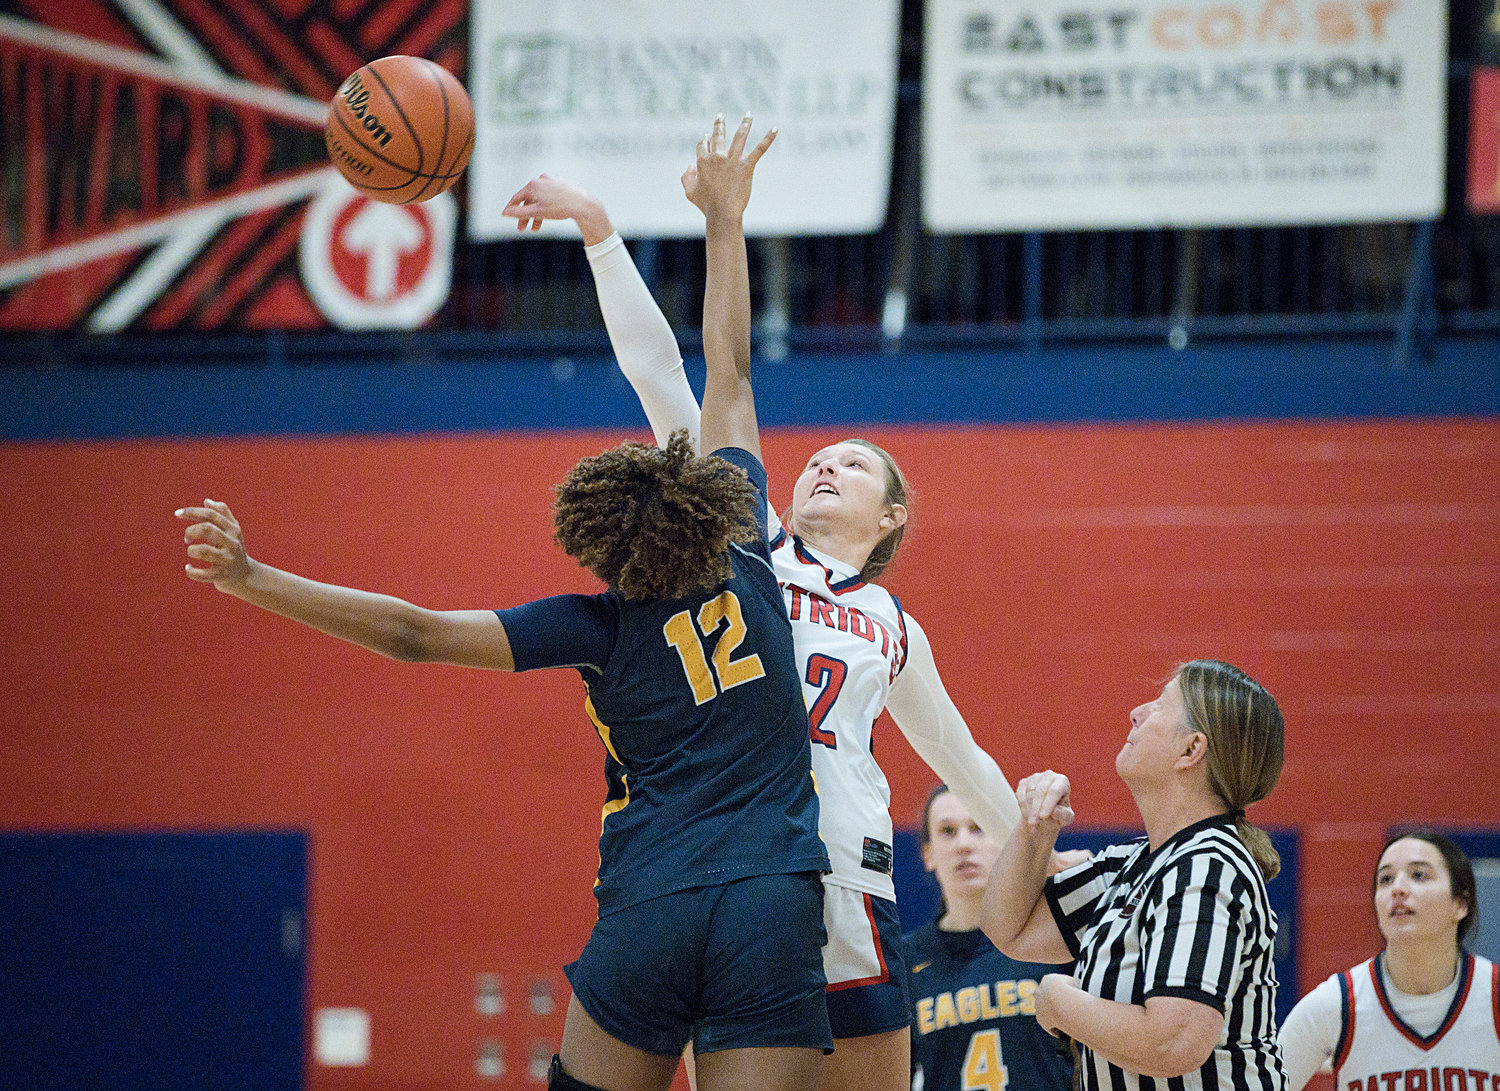 Morgan Casey tips off against Barrington’s Lindsey Lemay at the start of Monday’s game.